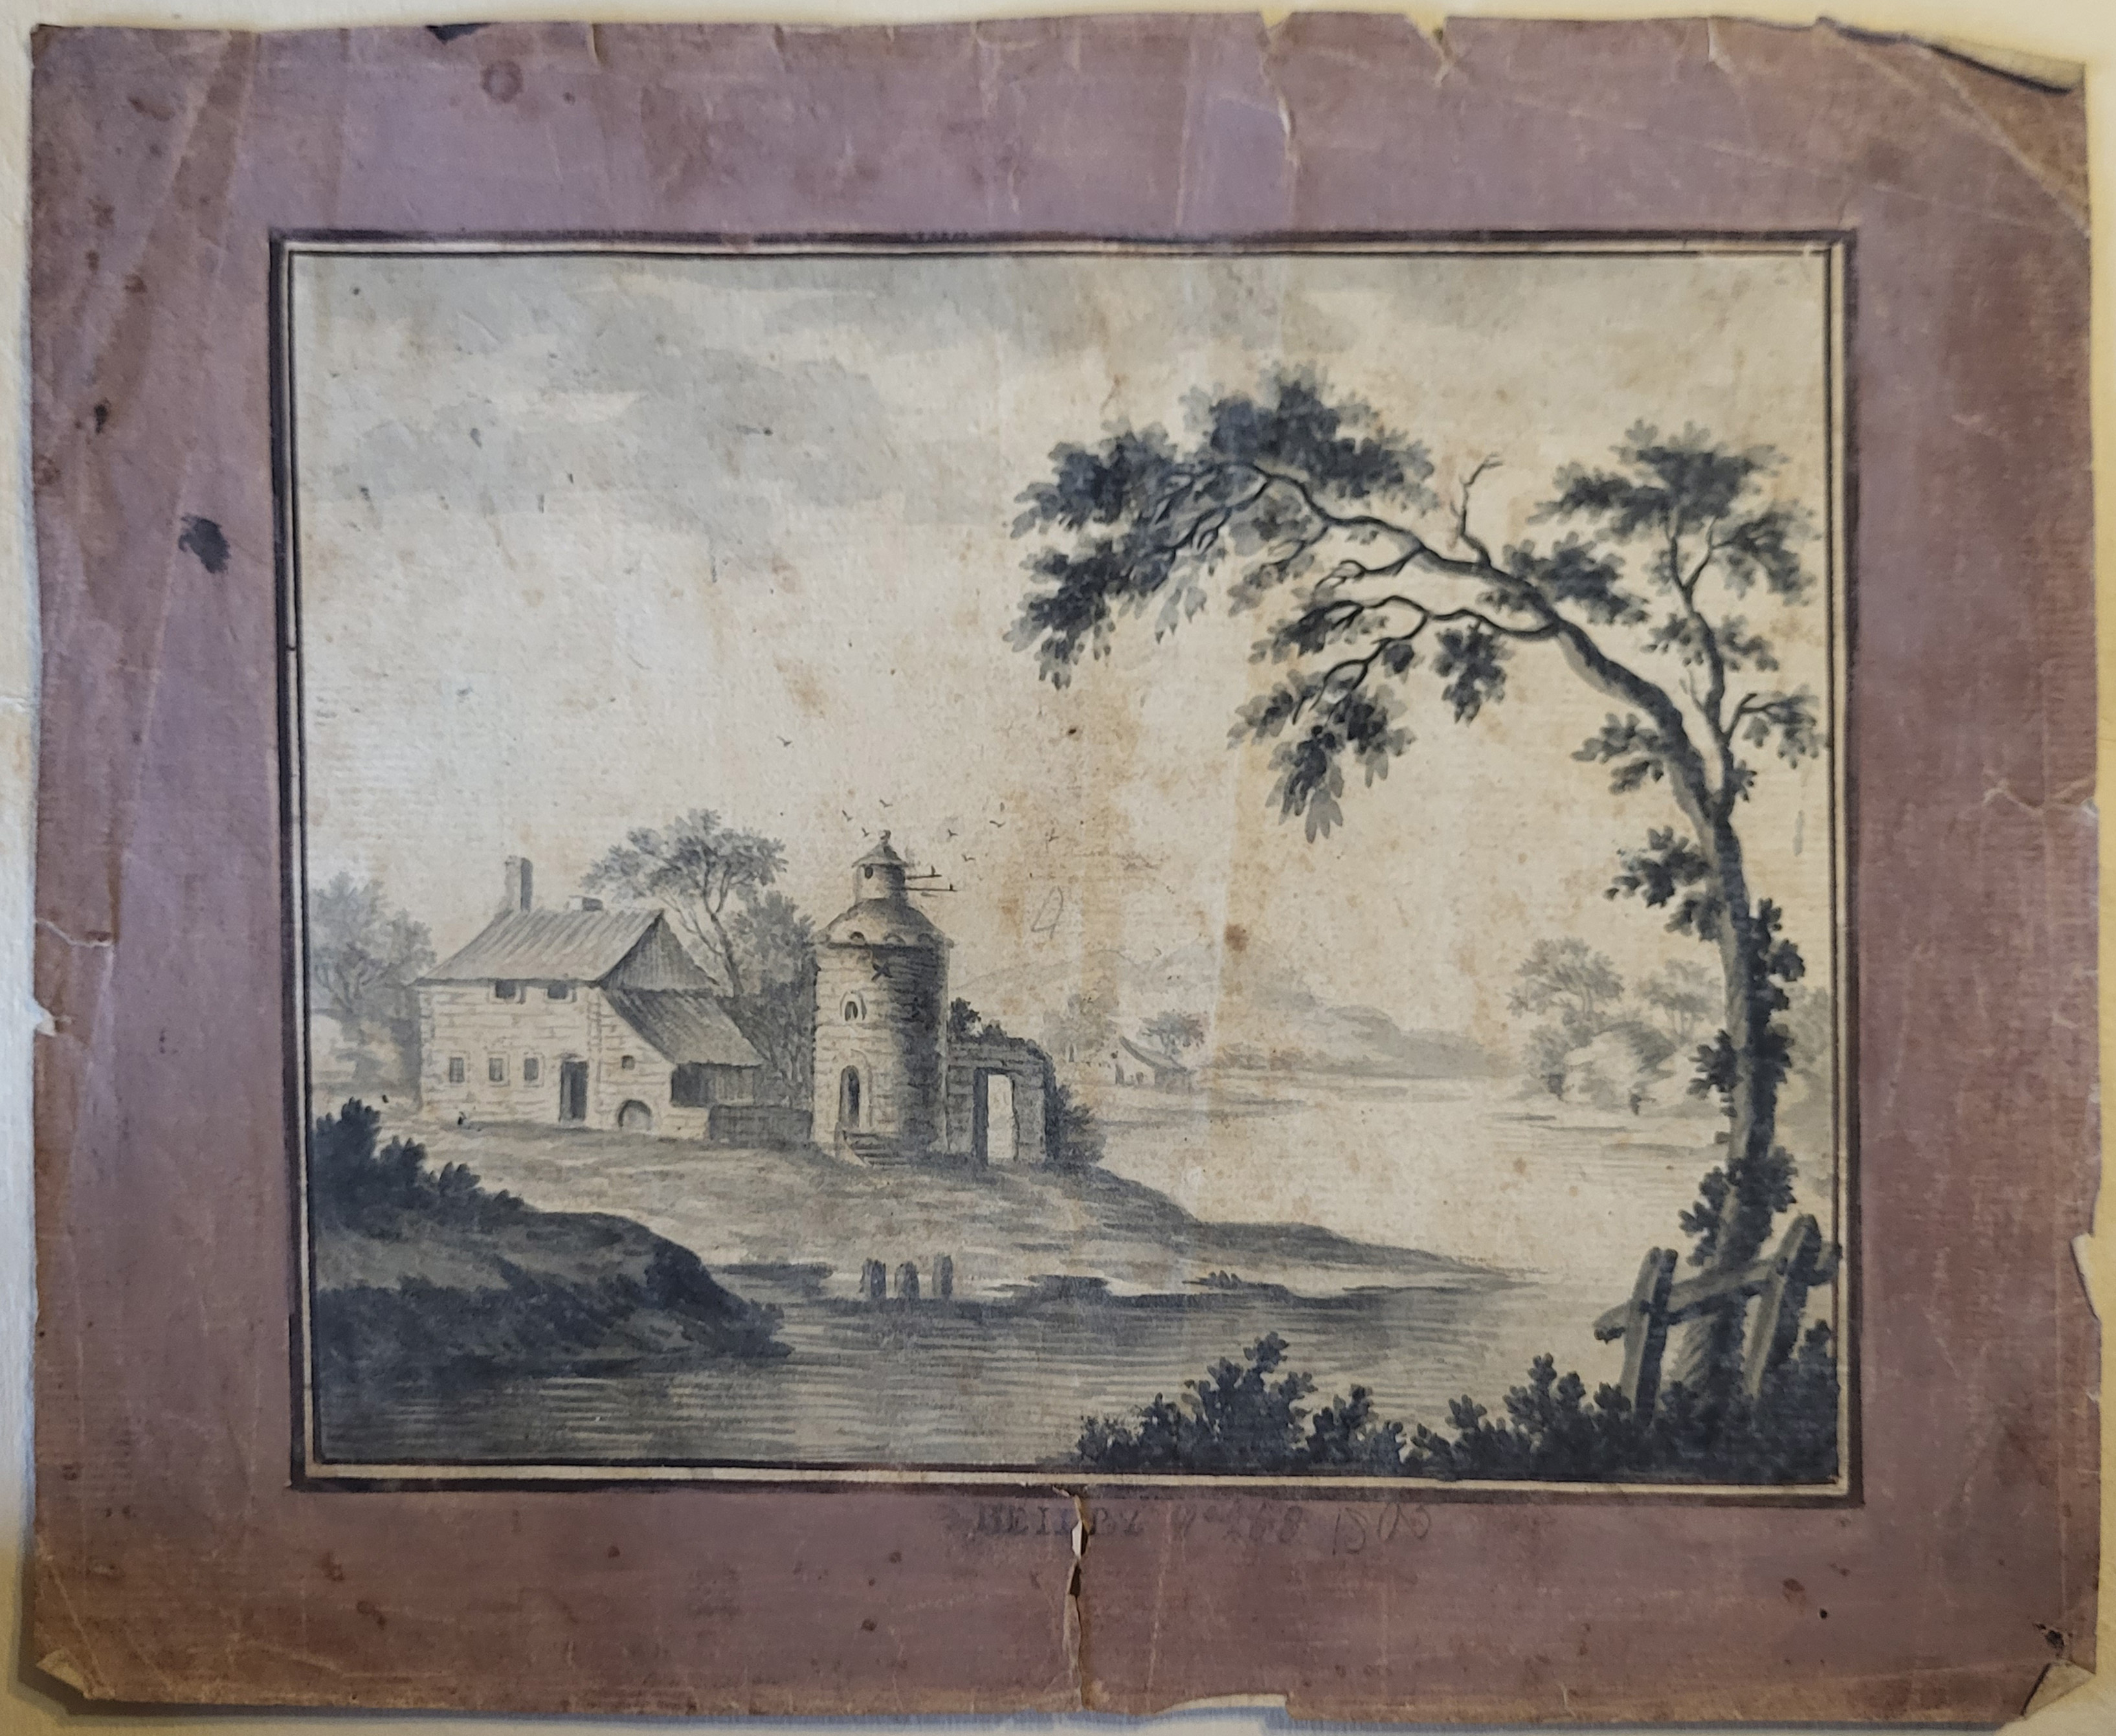 WILLIAM BEILBY, 1740 - 1819, A COLLECTION OF SEVEN EARLY GEORGIAN AND GEORGE III PERIOD LANDSCAPE - Image 4 of 7